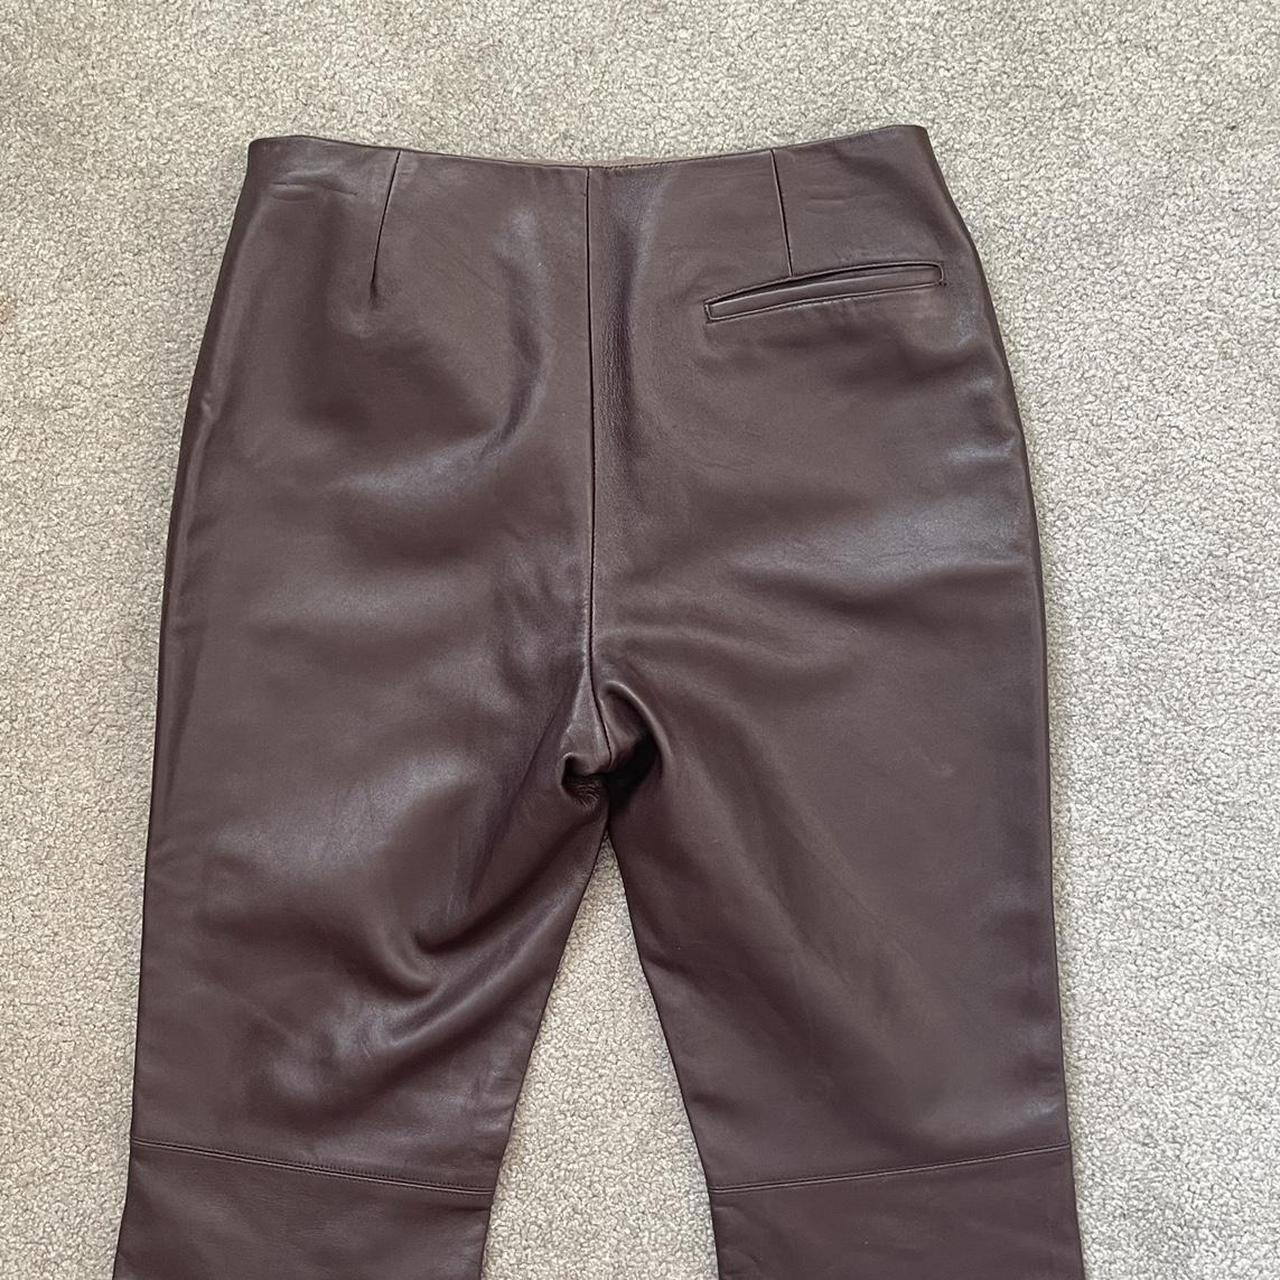 Lord & Berry Women's Brown Trousers (2)